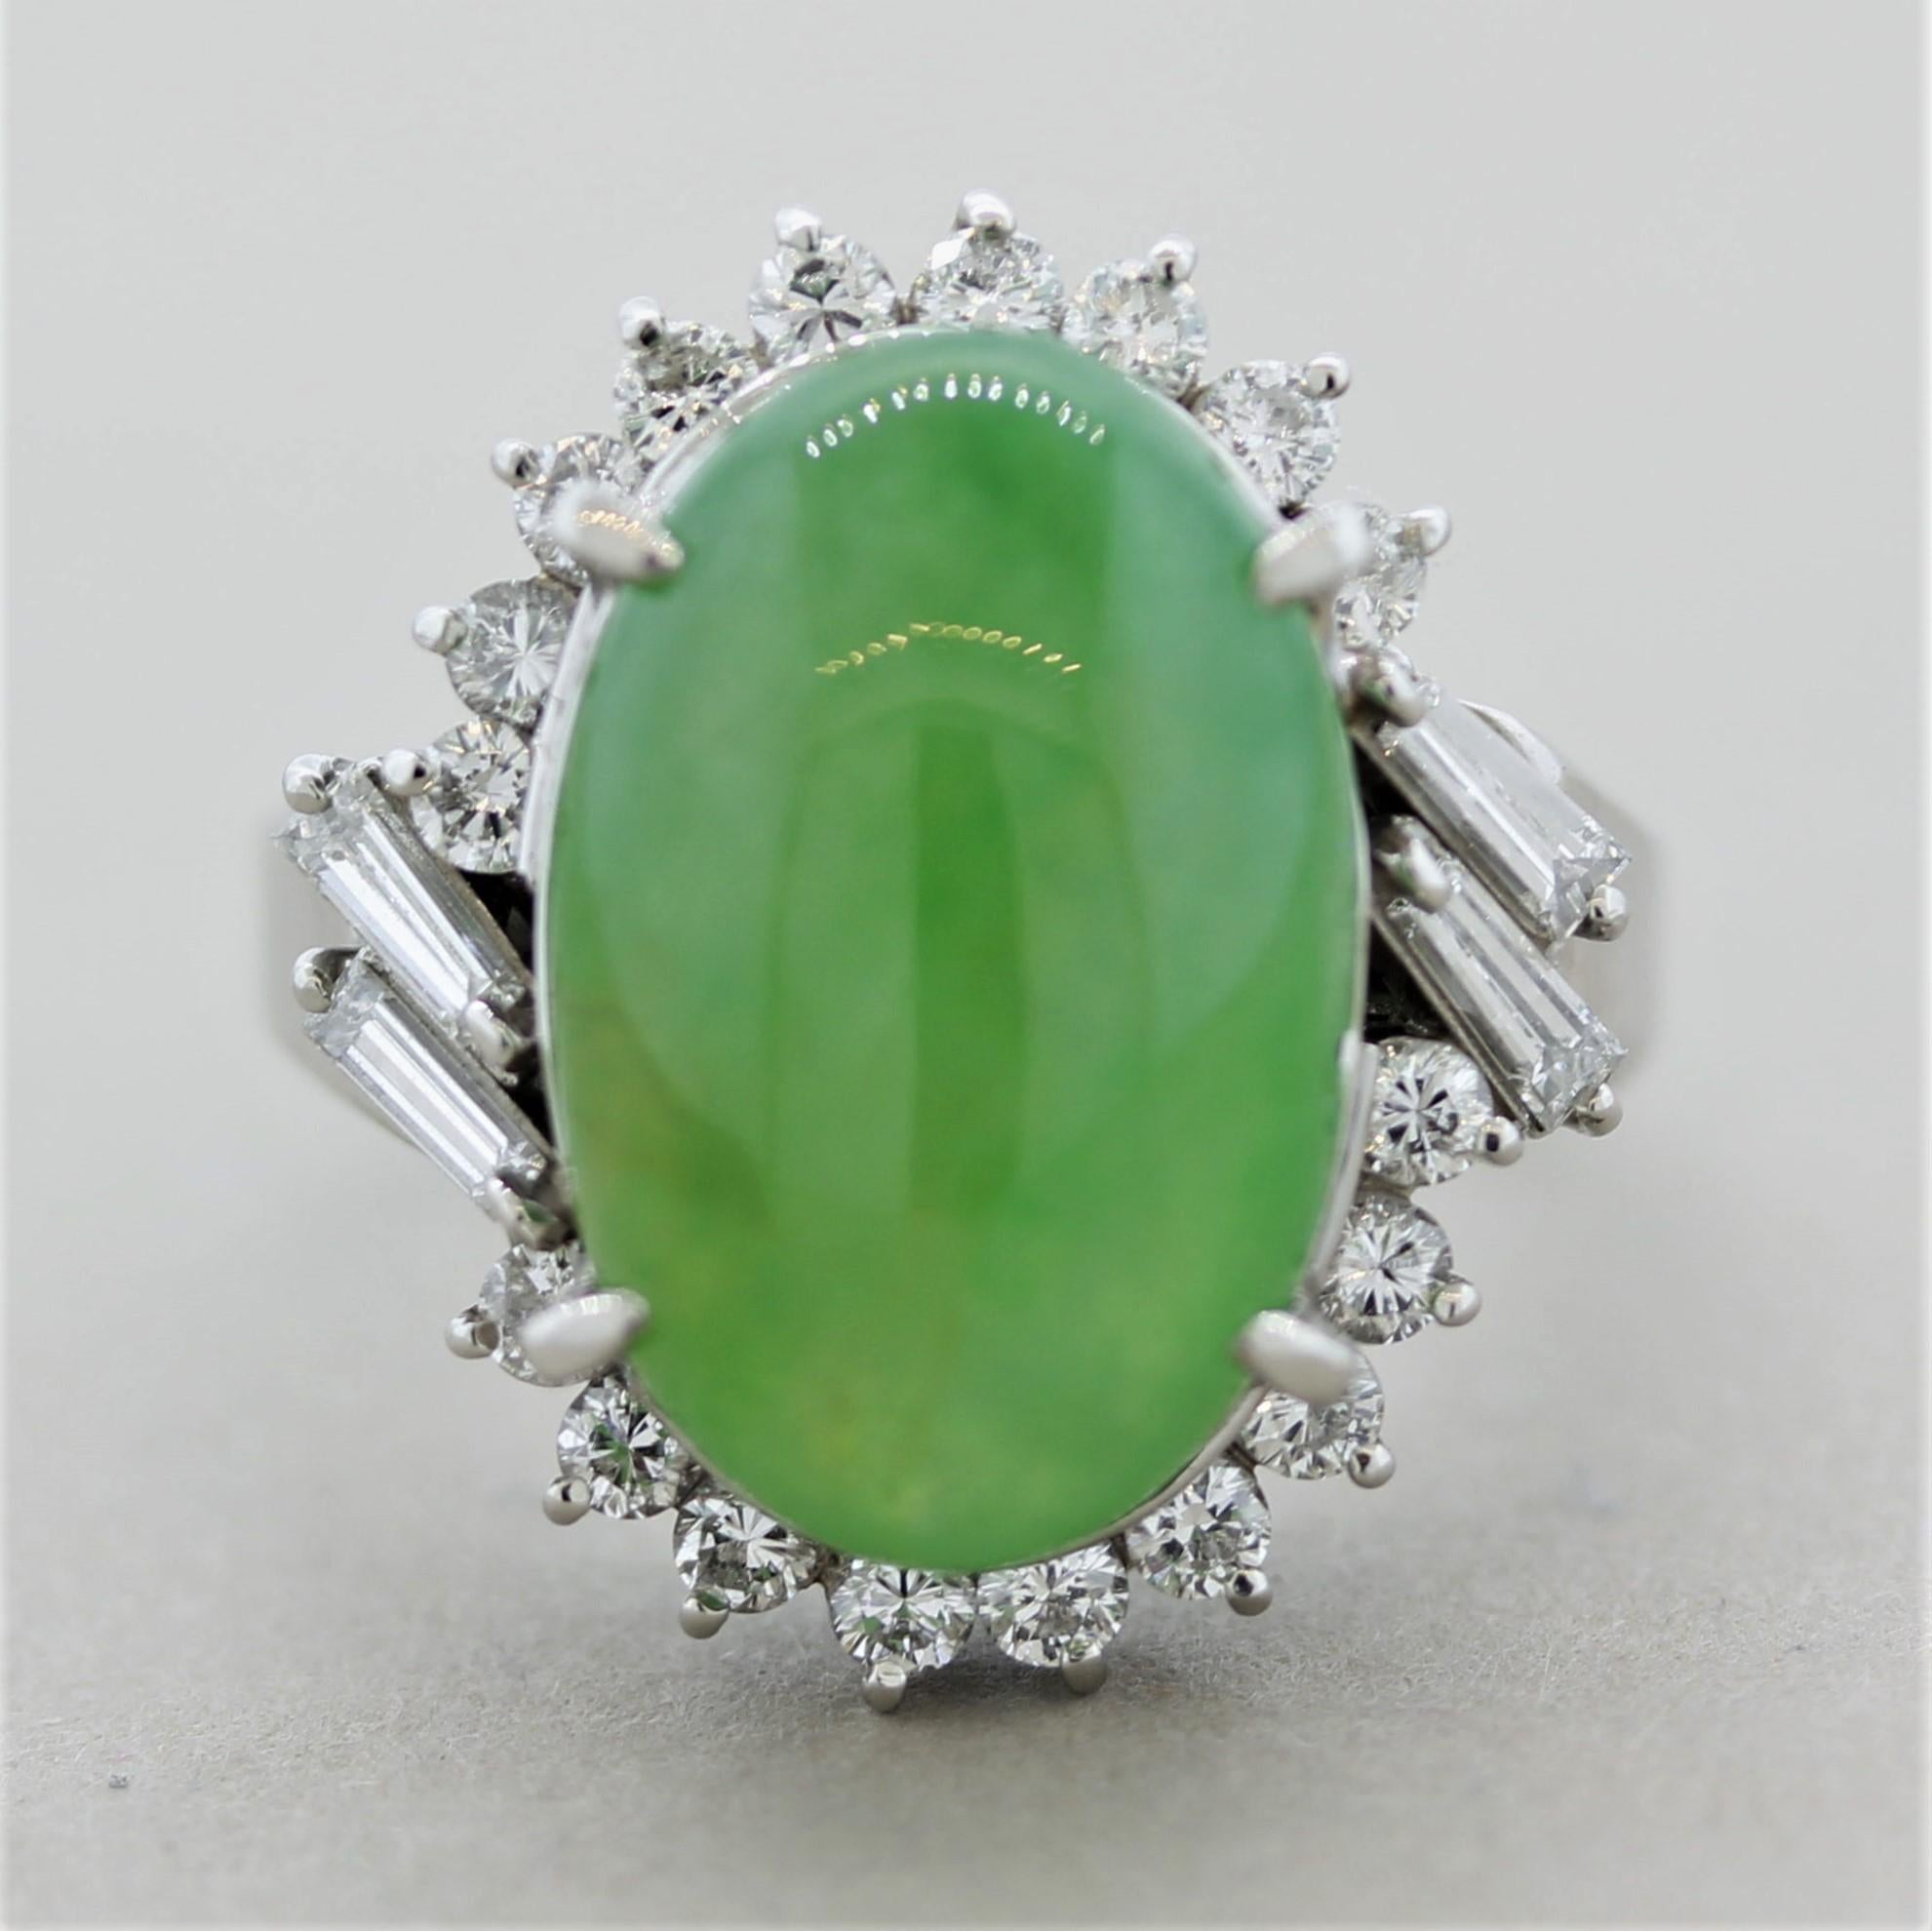 A natural jadeite jade takes center stage! It has a soft yet bright green color with excellent luster as light rolls across its surface. It is accented by 0.85 carats of round brilliant and baguette-cut diamonds set in a stylish pattern around the